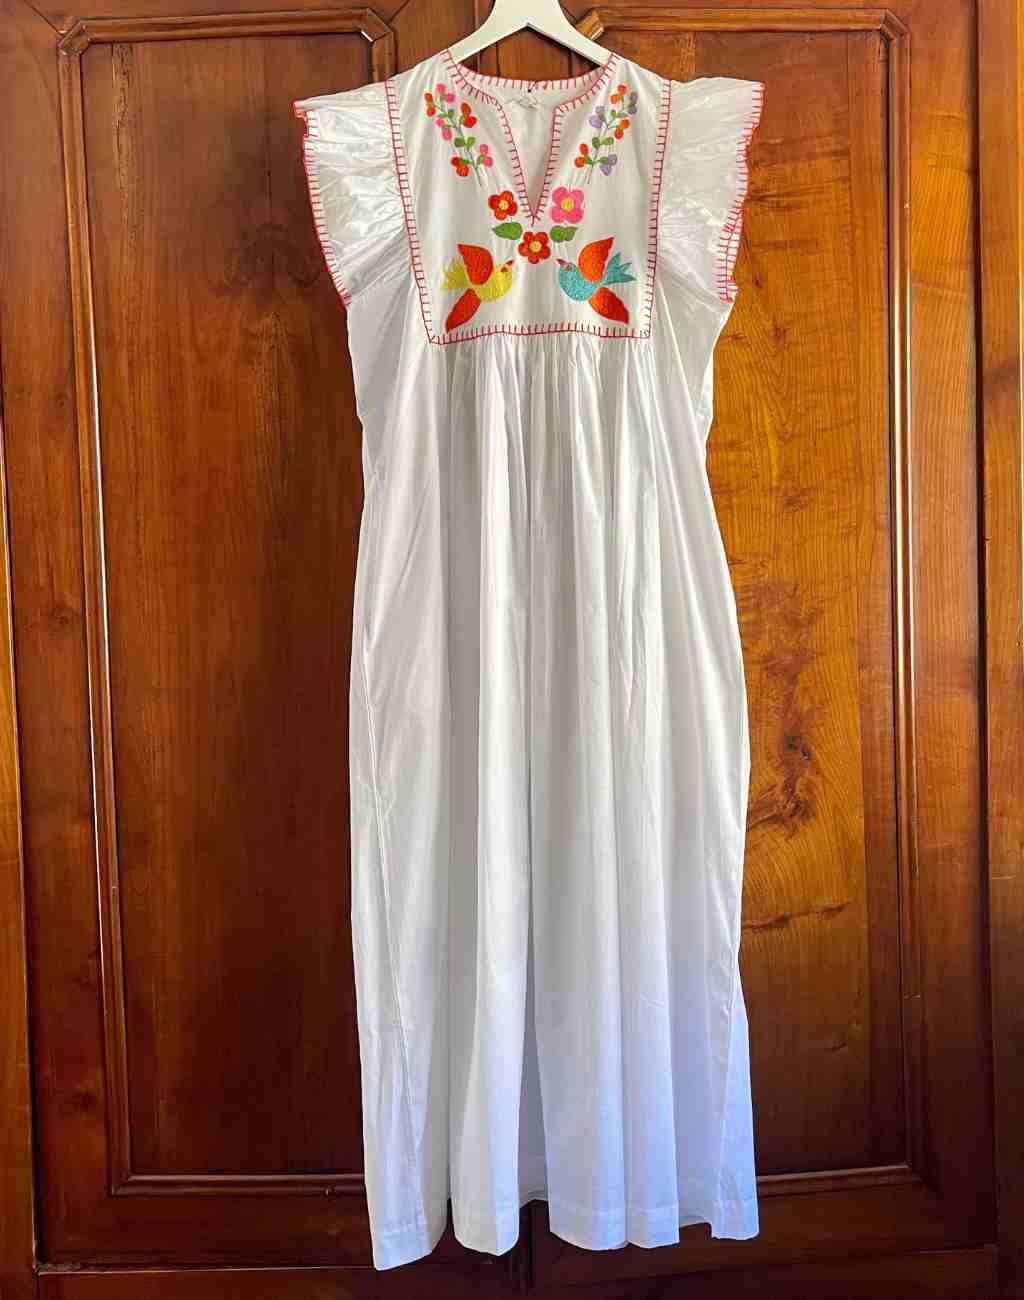 White Midi/Maxi Dress with Whimsical Embroidery and Flutter